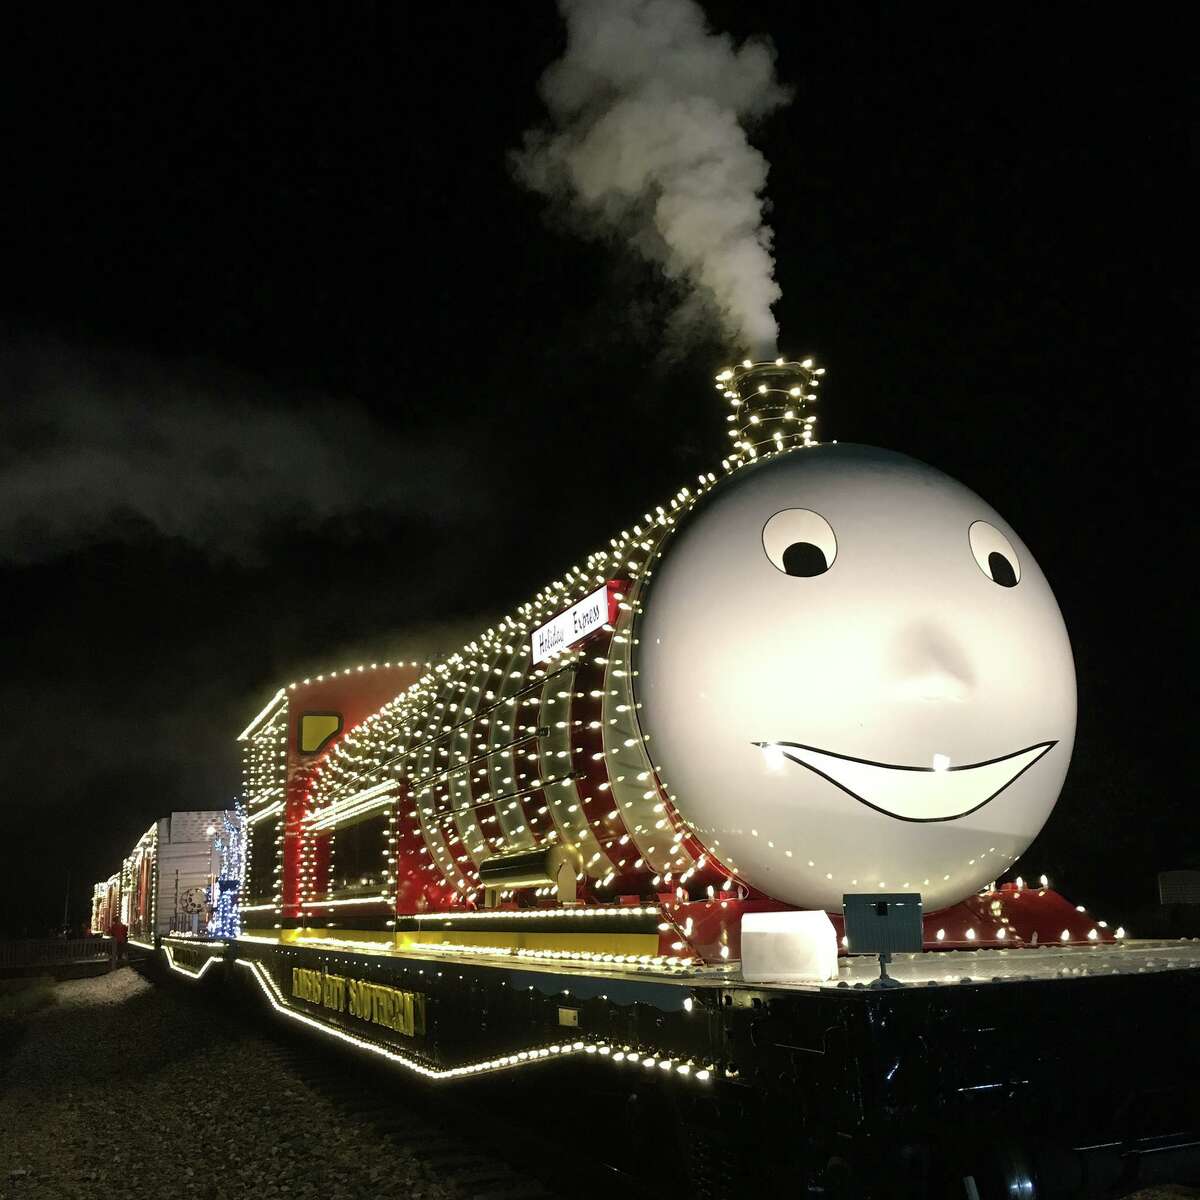 Over 20 years, the charitable component of the KCS Holiday Express project has raised well over $2.6 million.